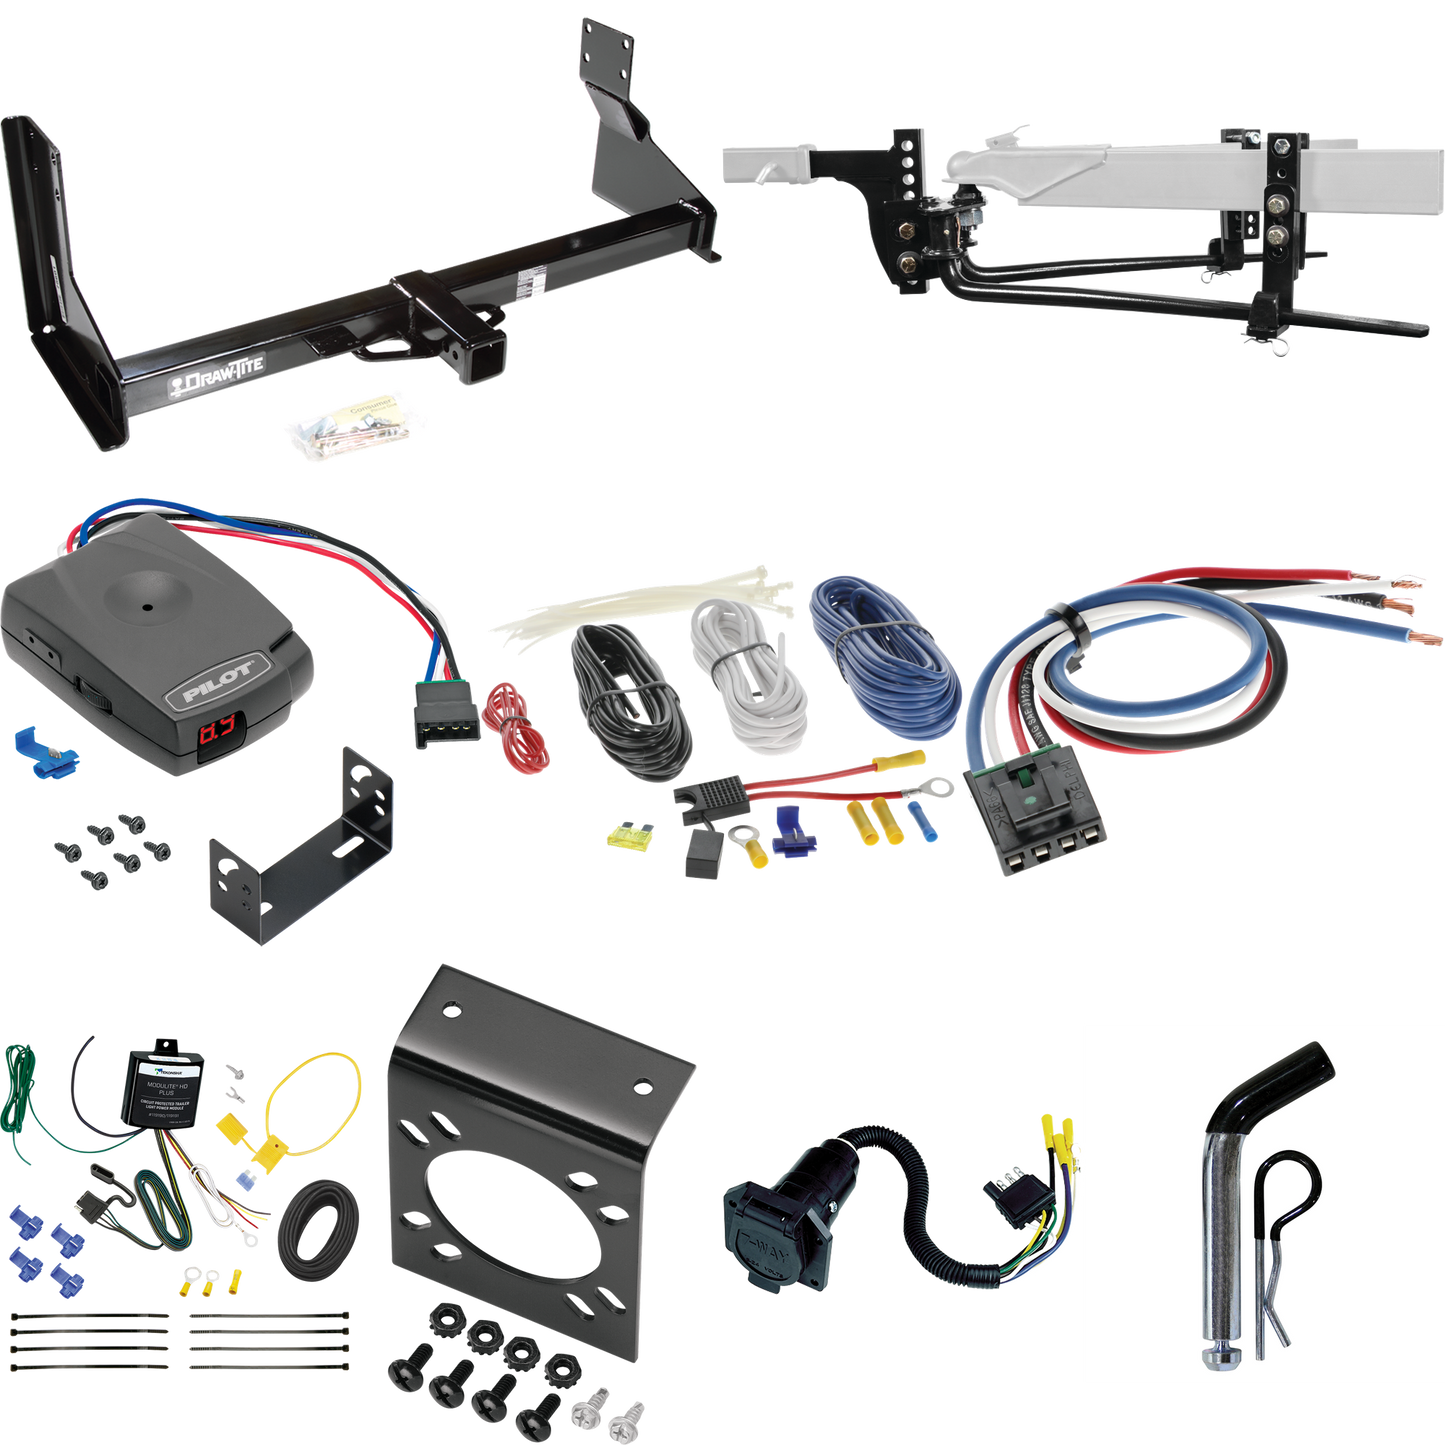 Fits 2023-2023 Mercedes-Benz Sprinter 2500 Trailer Hitch Tow PKG w/ 8K Round Bar Weight Distribution Hitch w/ 2-5/16" Ball + Pin/Clip + Pro Series Pilot Brake Control + Generic BC Wiring Adapter + 7-Way RV Wiring (For w/Factory Step Bumper Excluding